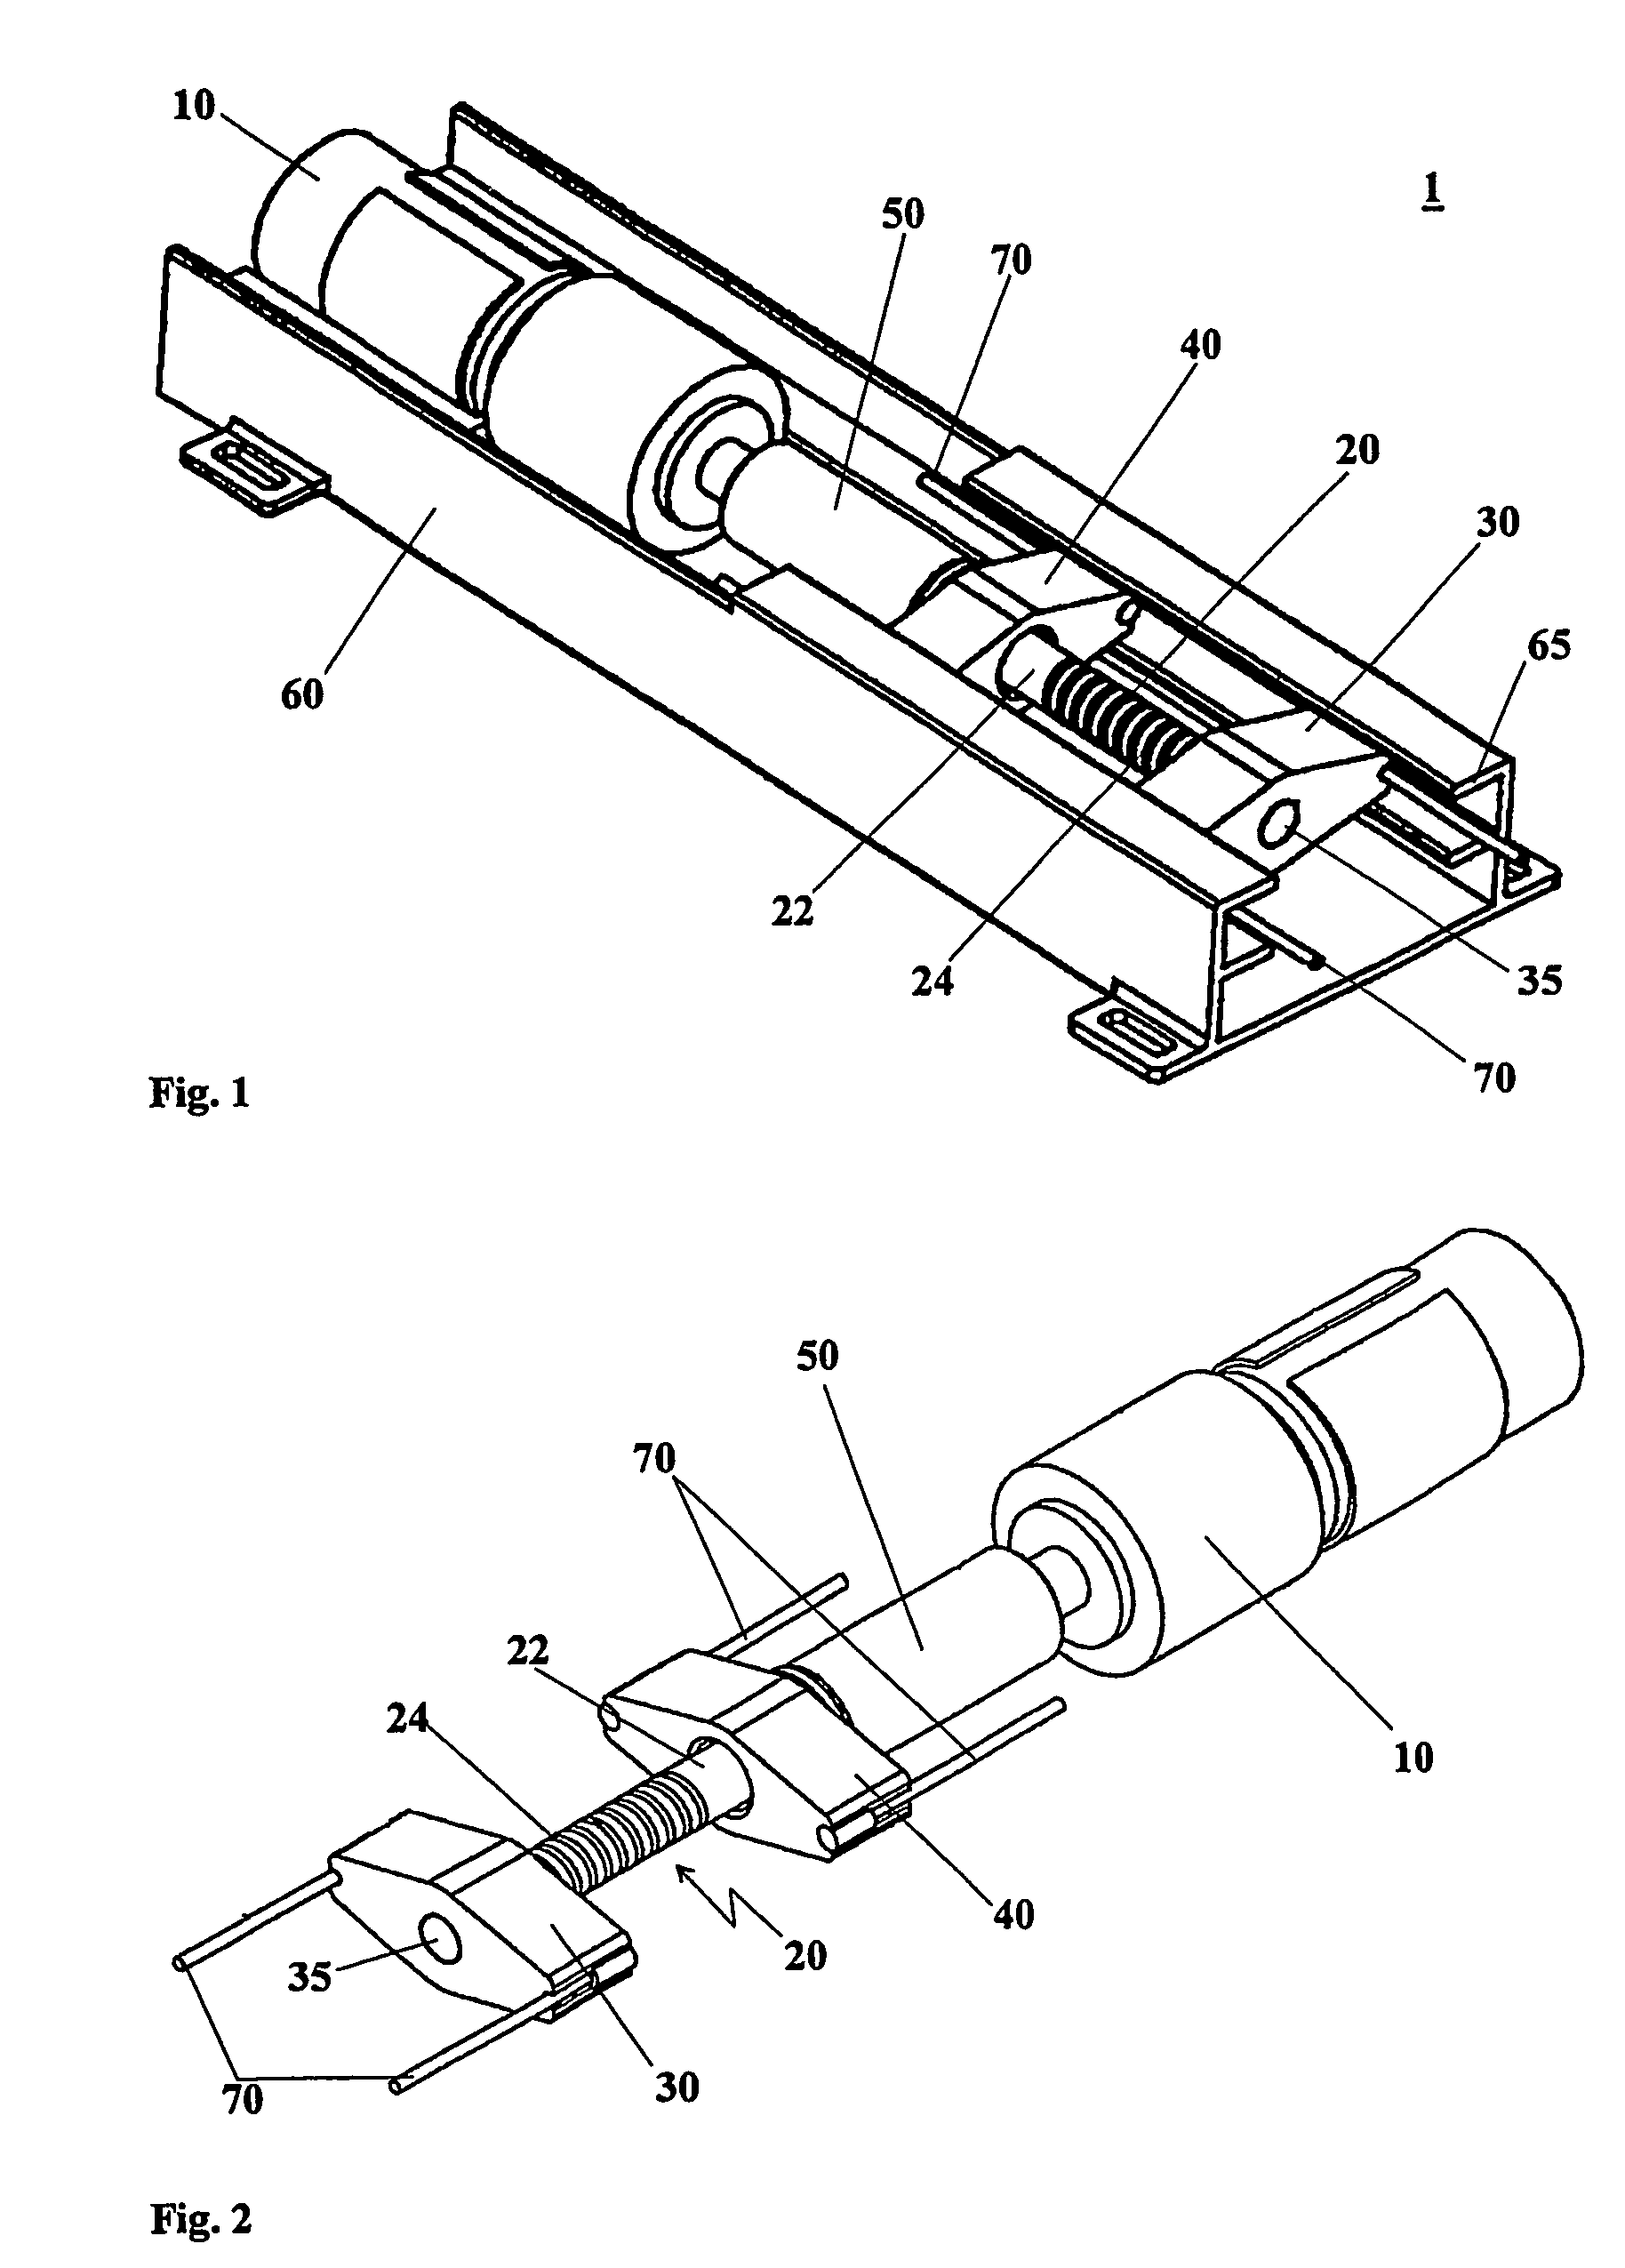 Operating mechanism for a parking brake